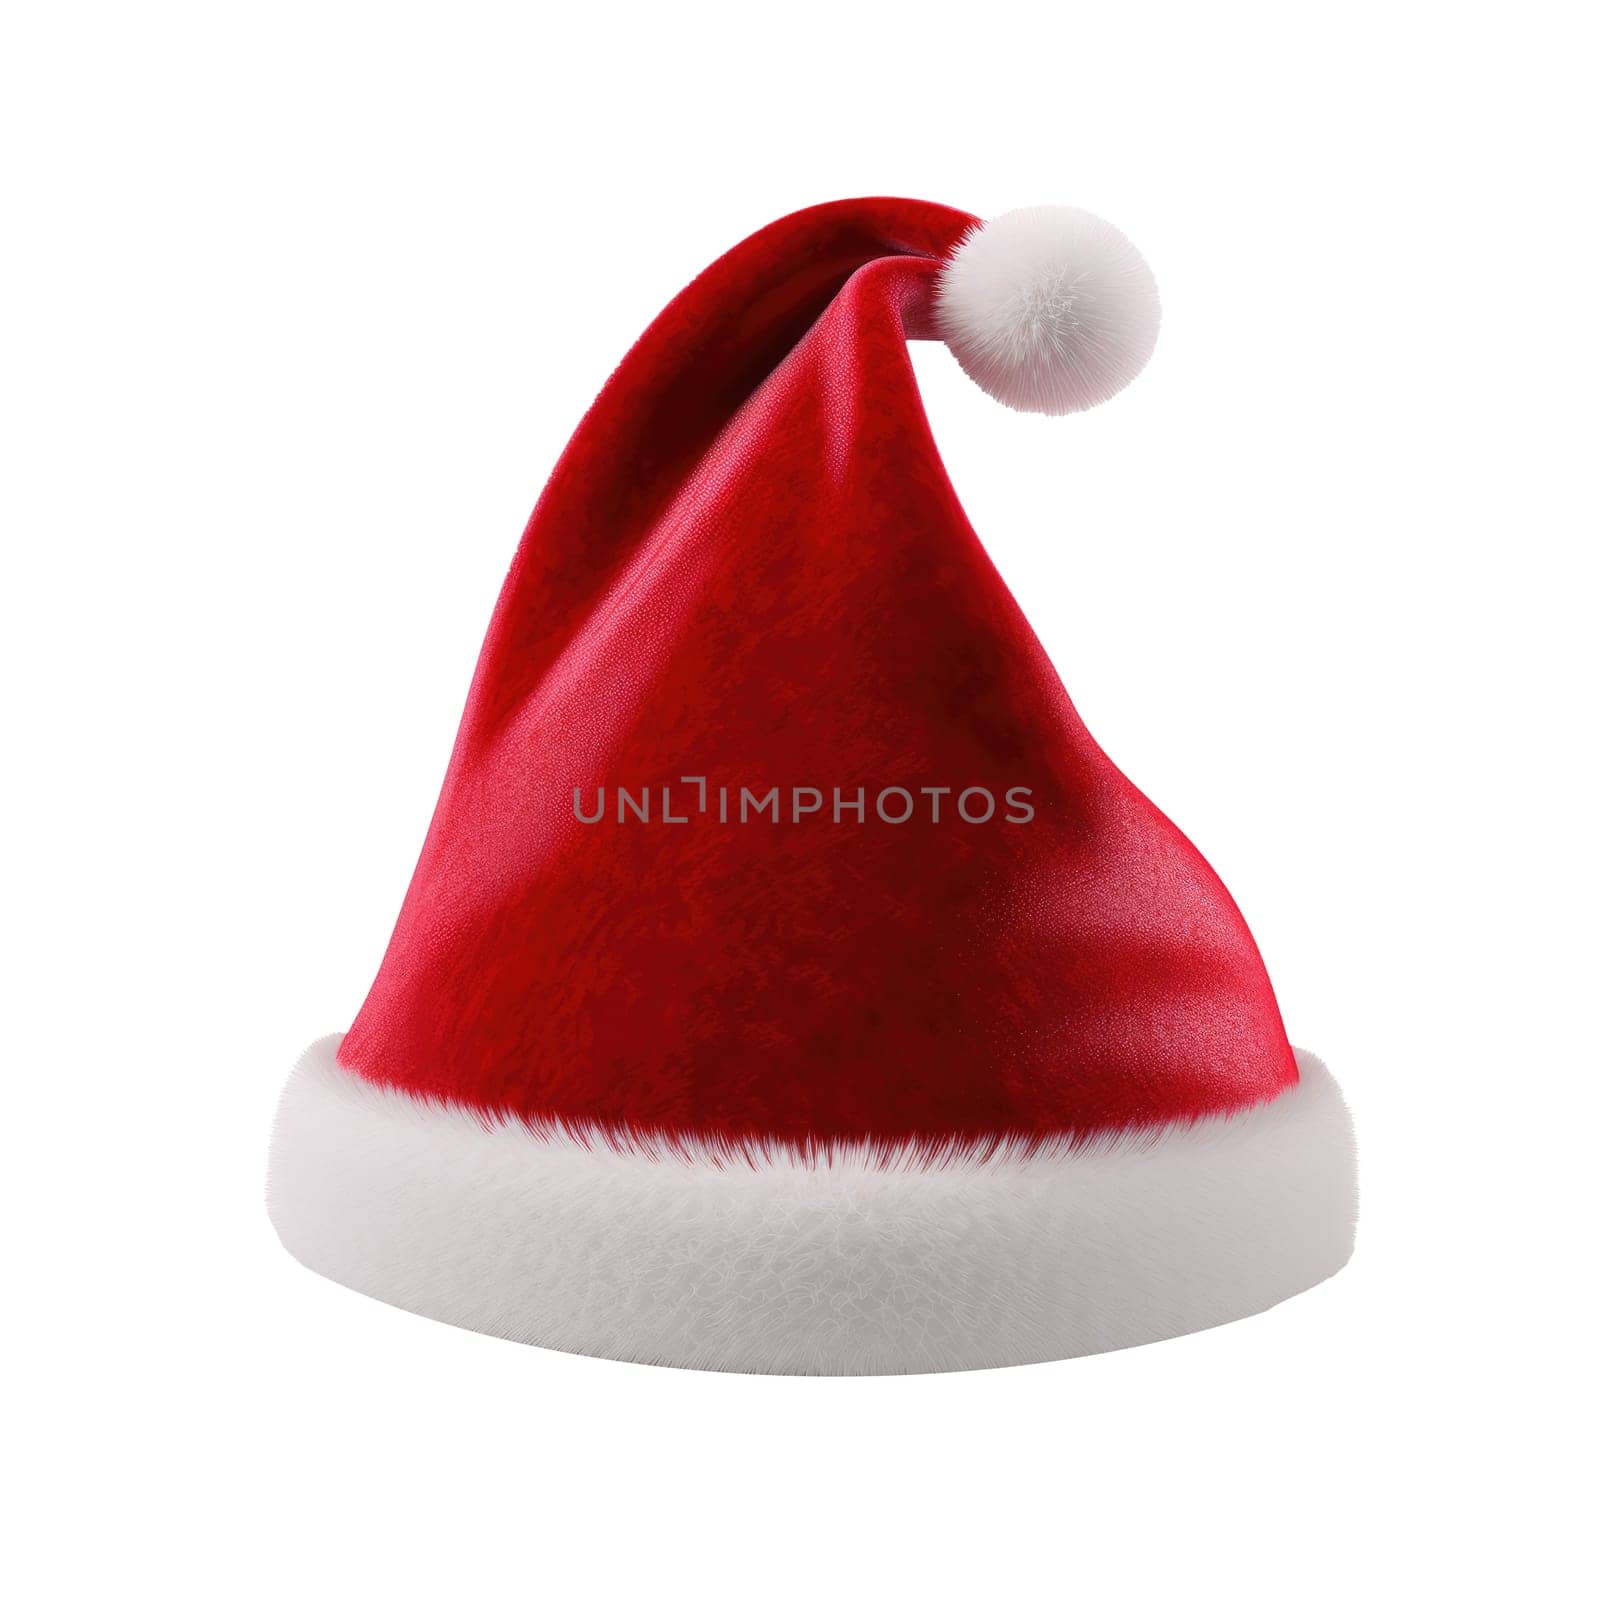 Single Santa Claus red hat isolated on white background.